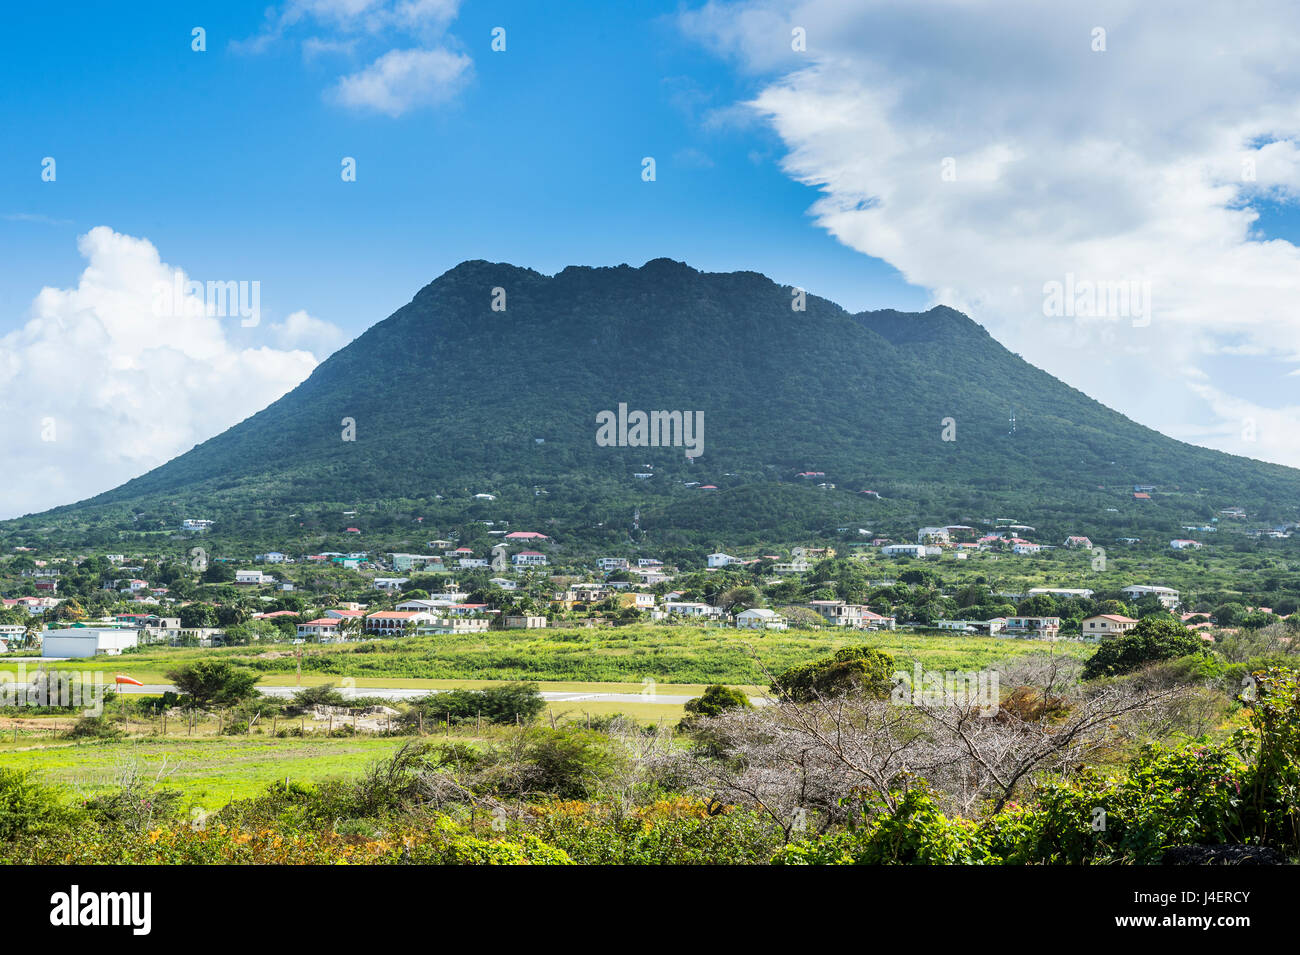 The Quill hill, St. Eustatius, Statia, Netherland Antilles, West Indies, Caribbean, Central America Stock Photo